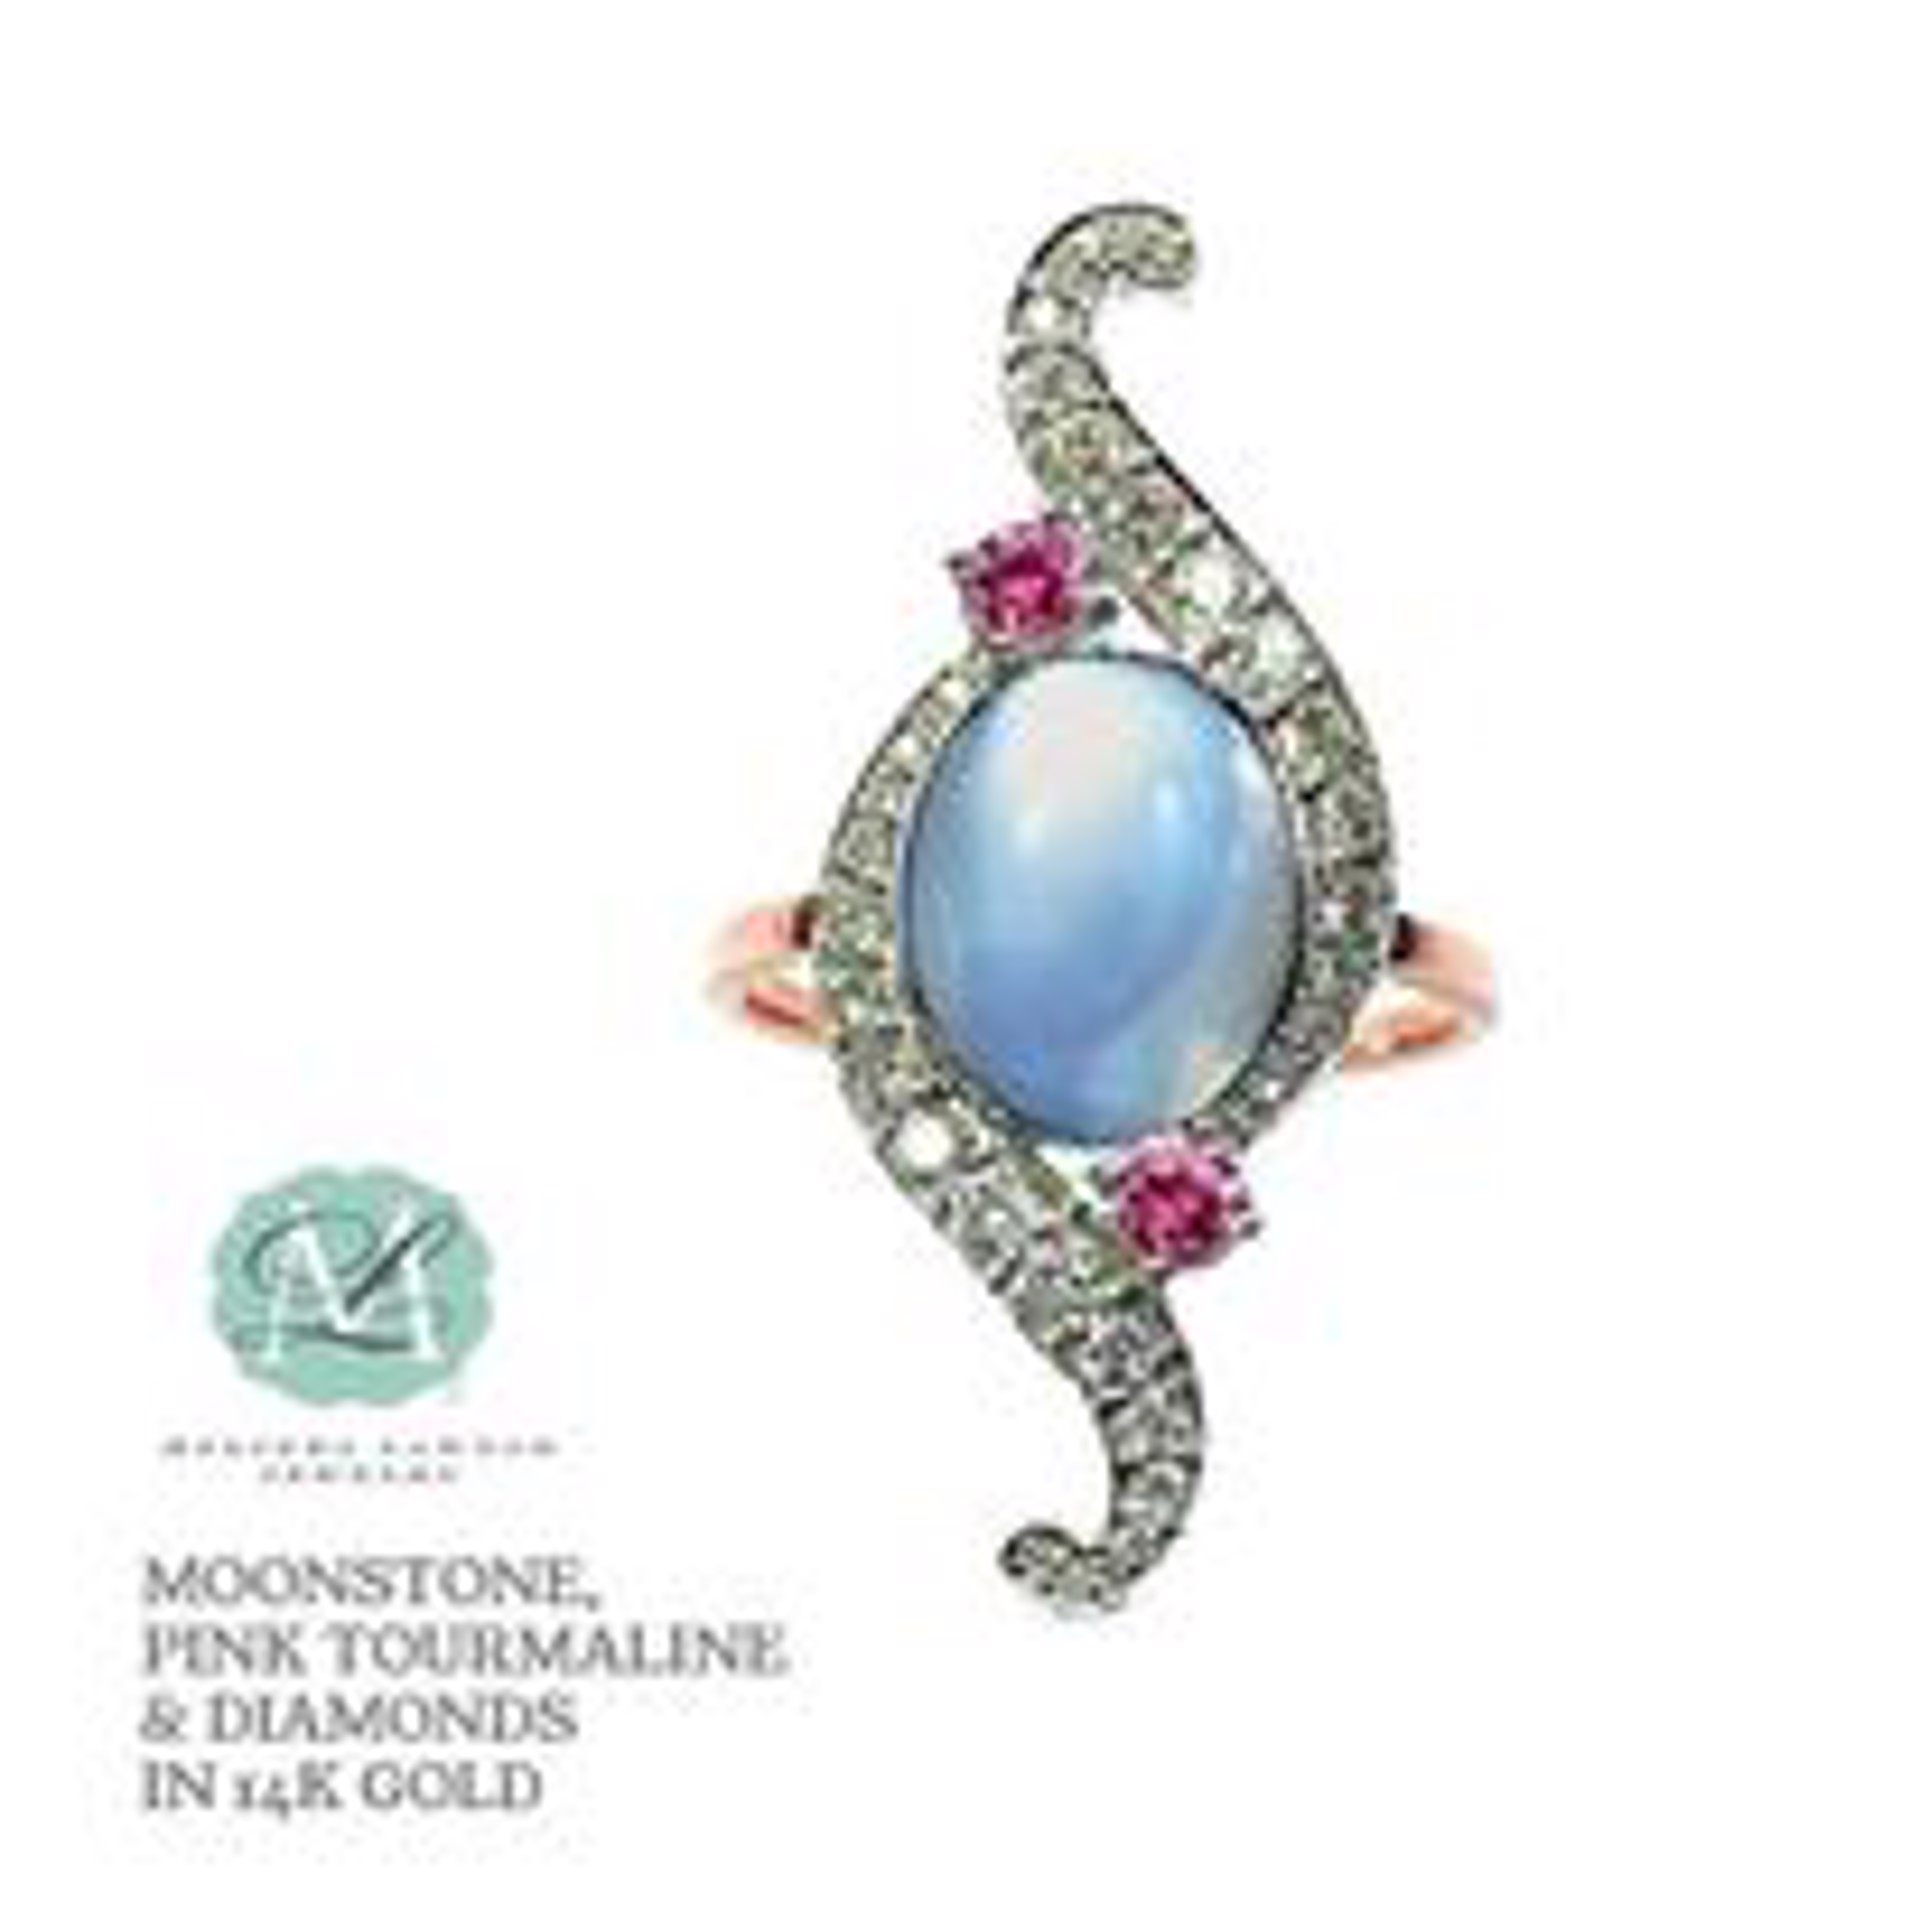 "Toi et Moi" Canadian OVal Moonstone cabochon with pink tourmaline accent stones with diamonds in 14k rose and white gold by Melinda Lawton Jewelry